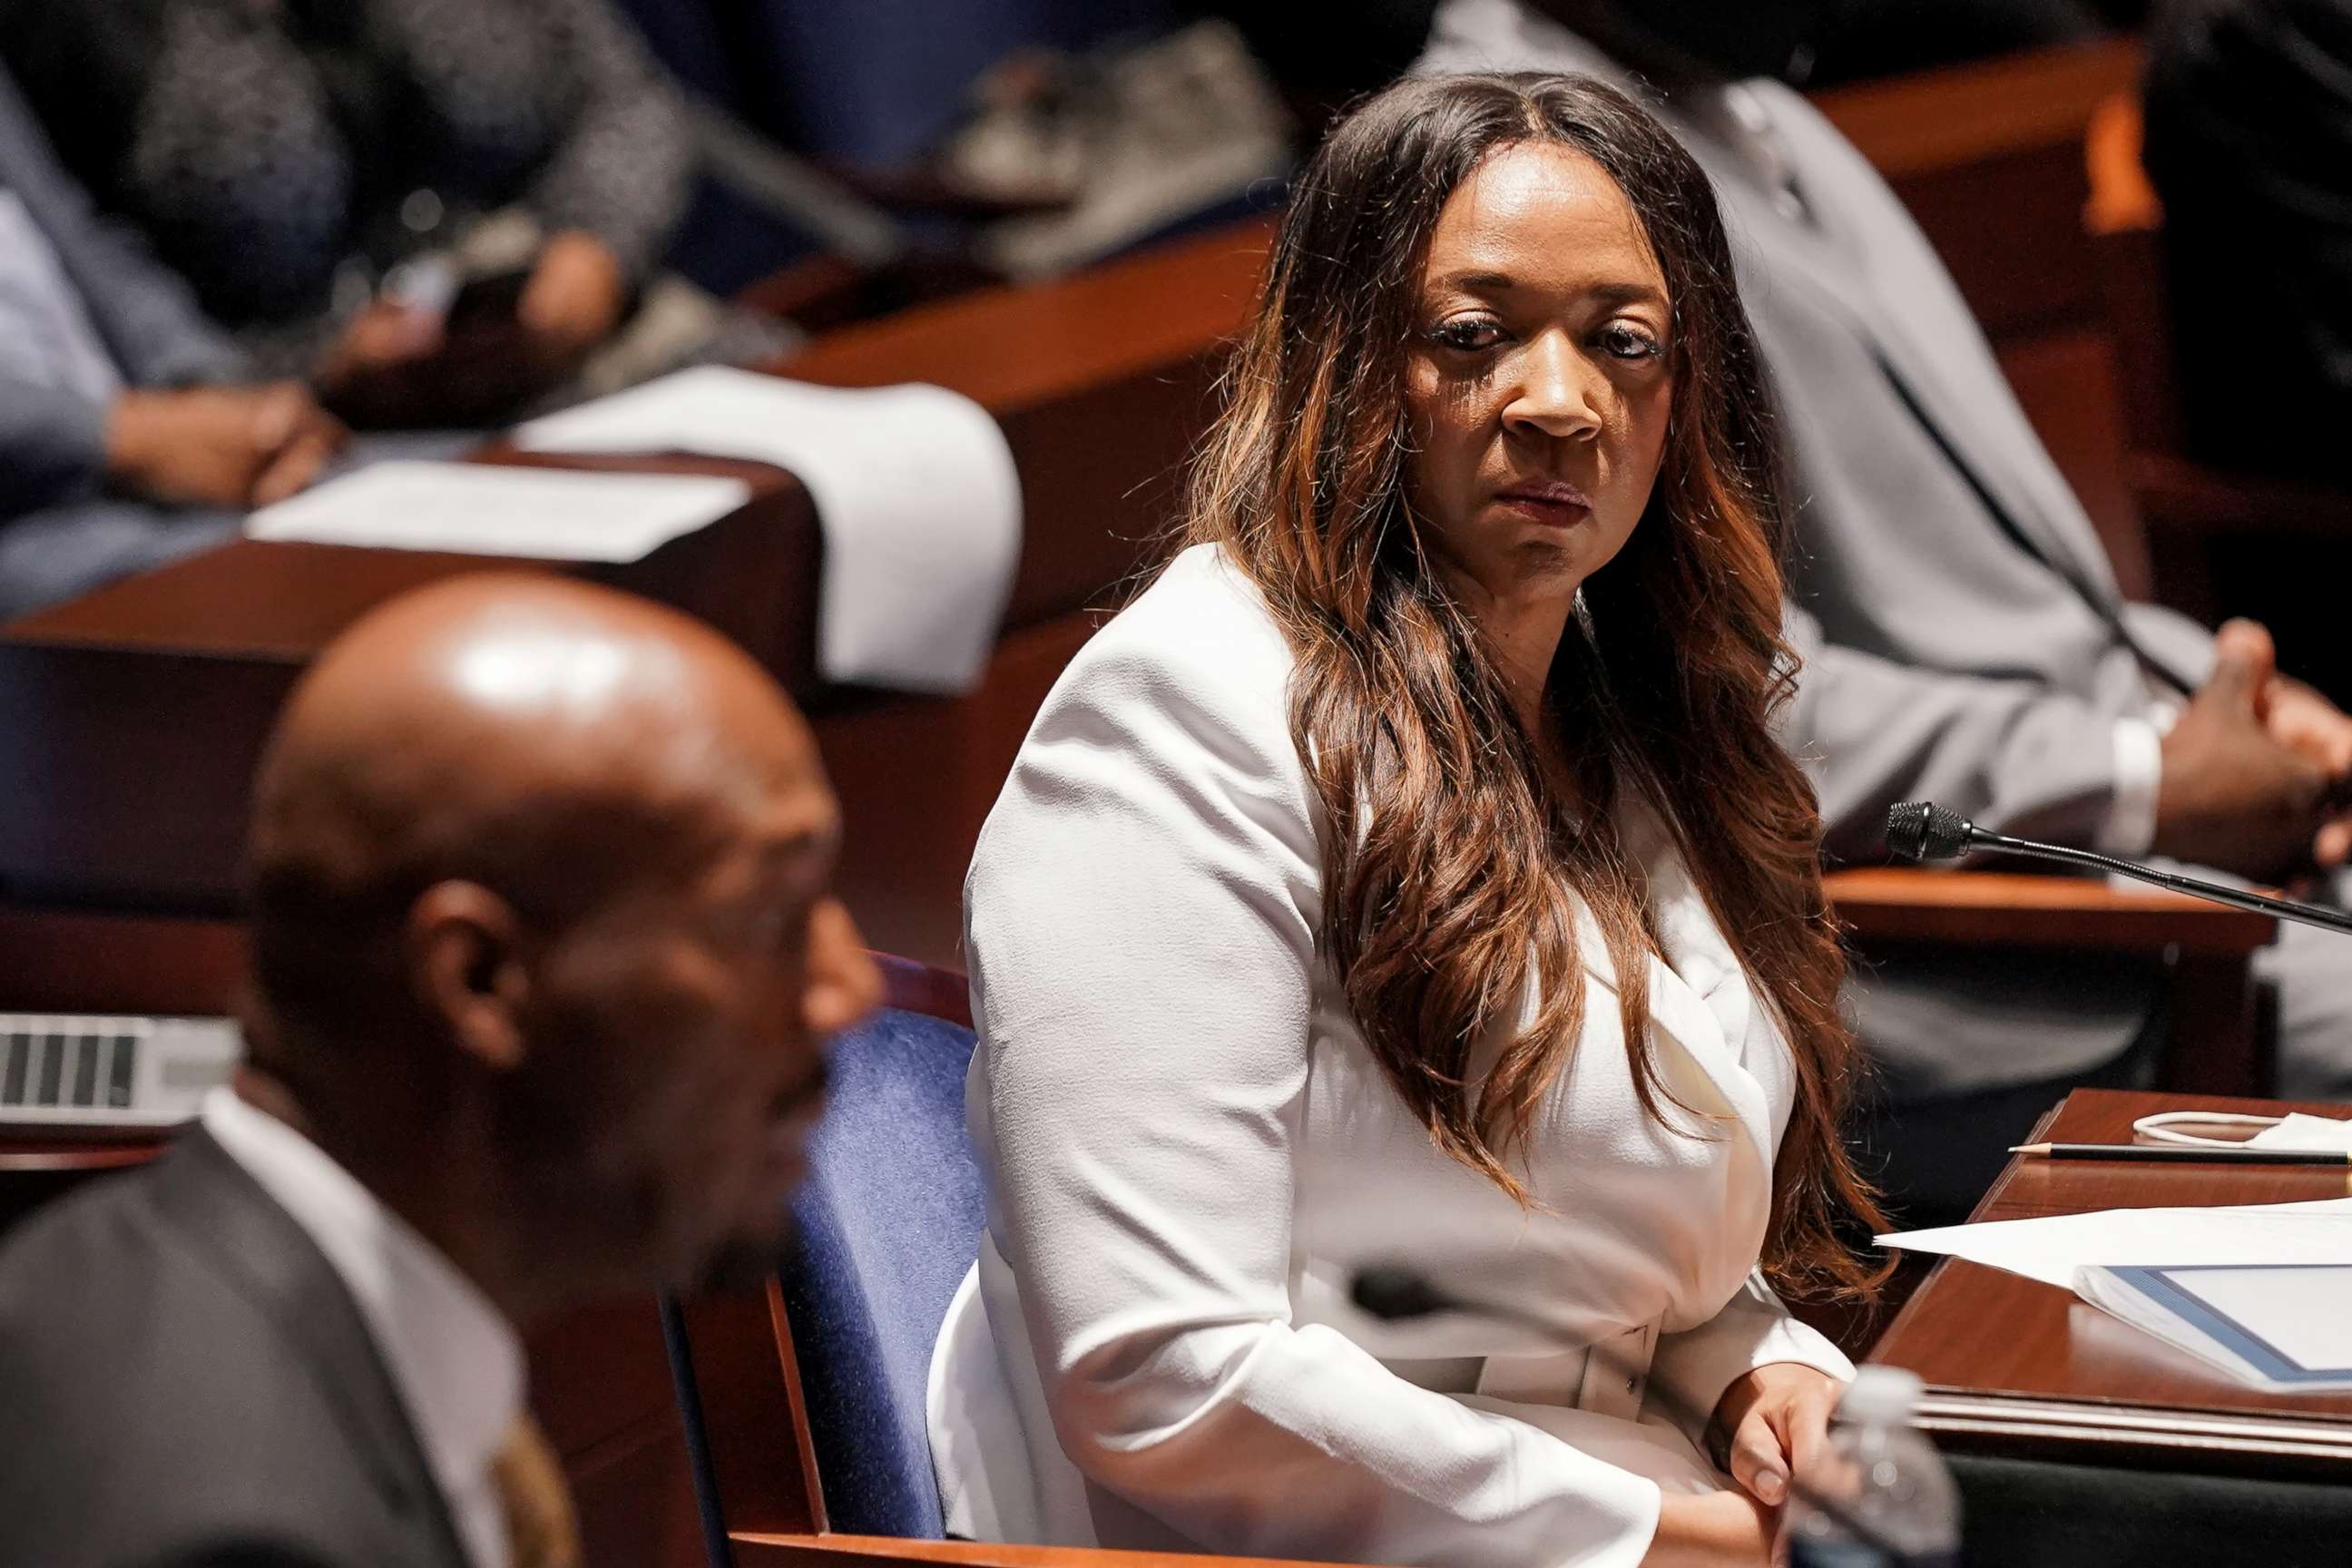 PHOTO: Angela Underwood-Jacobs attends a House Judiciary Committee hearing to discuss police brutality and racial profiling, in Washington, June 10, 2020.